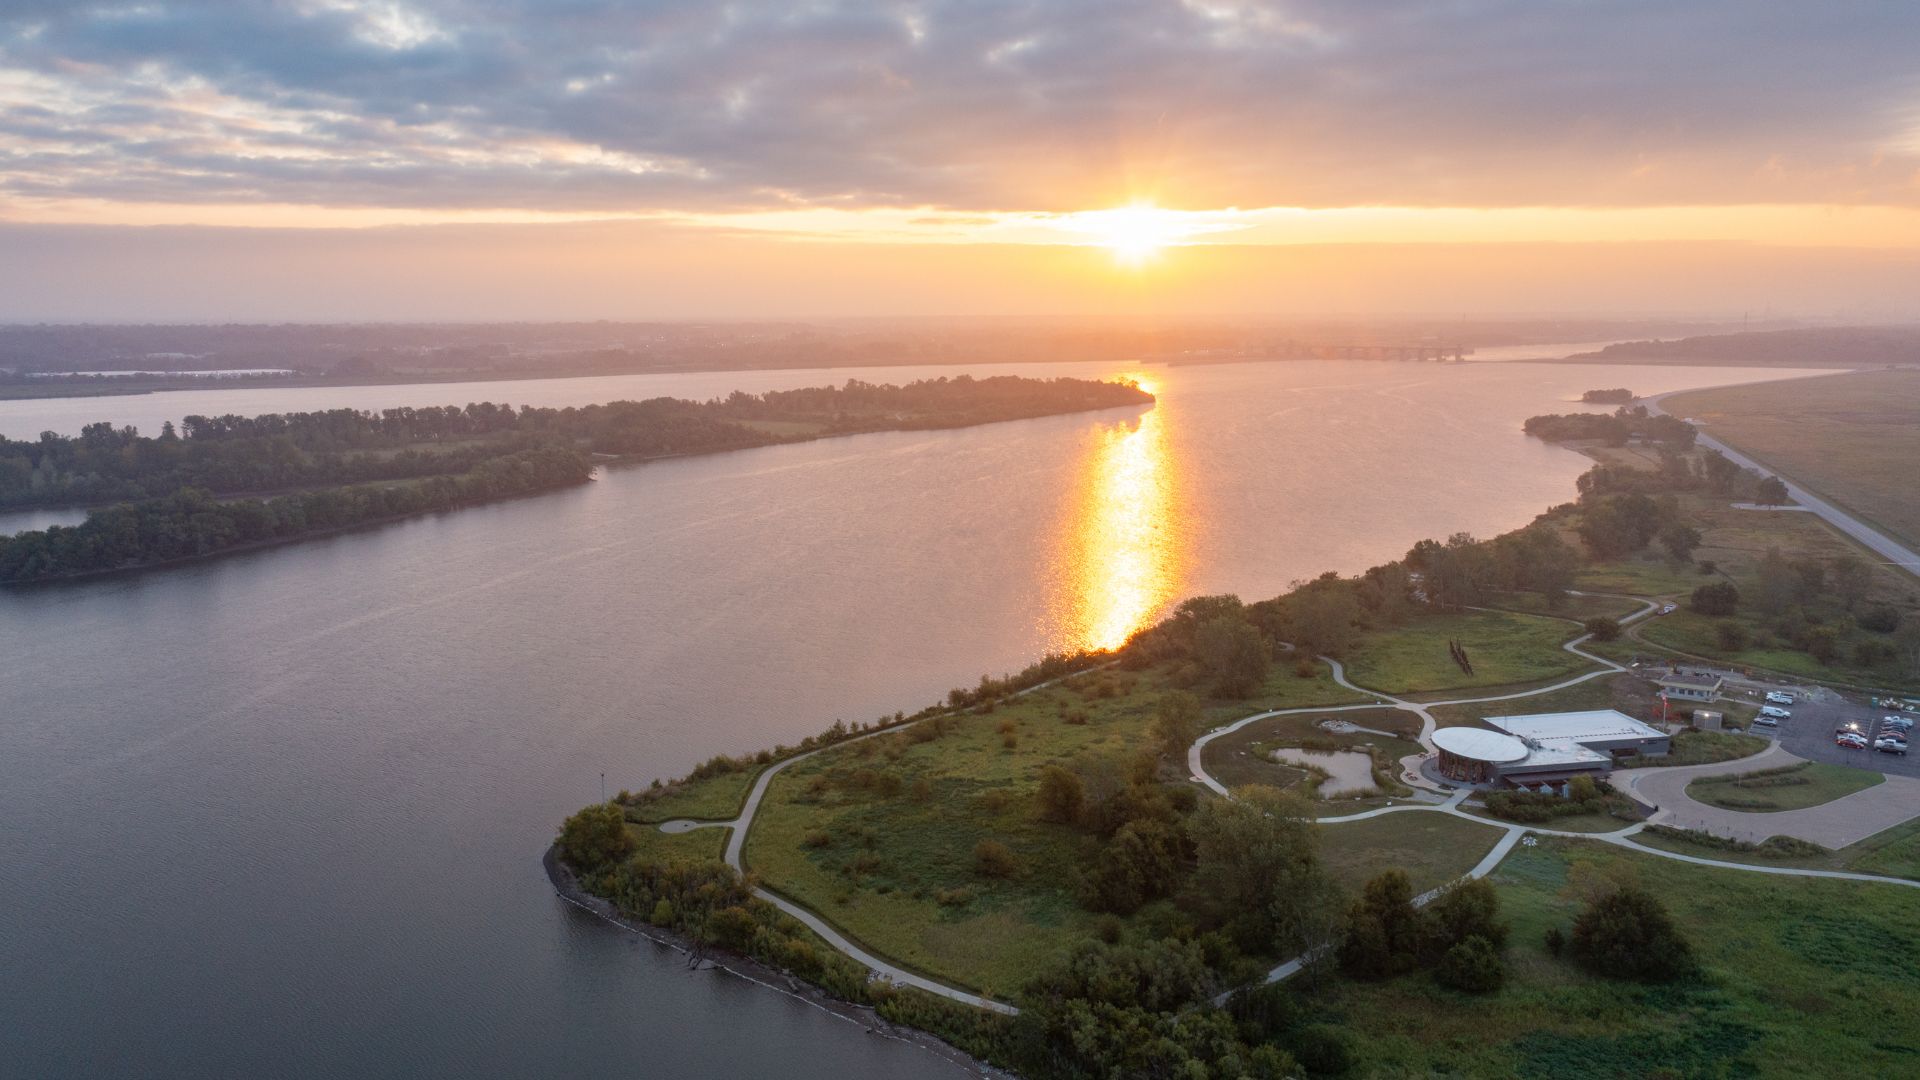 The Audubon Center at Riverlands aims to connect people to the beauty of the Great Rivers confluence.